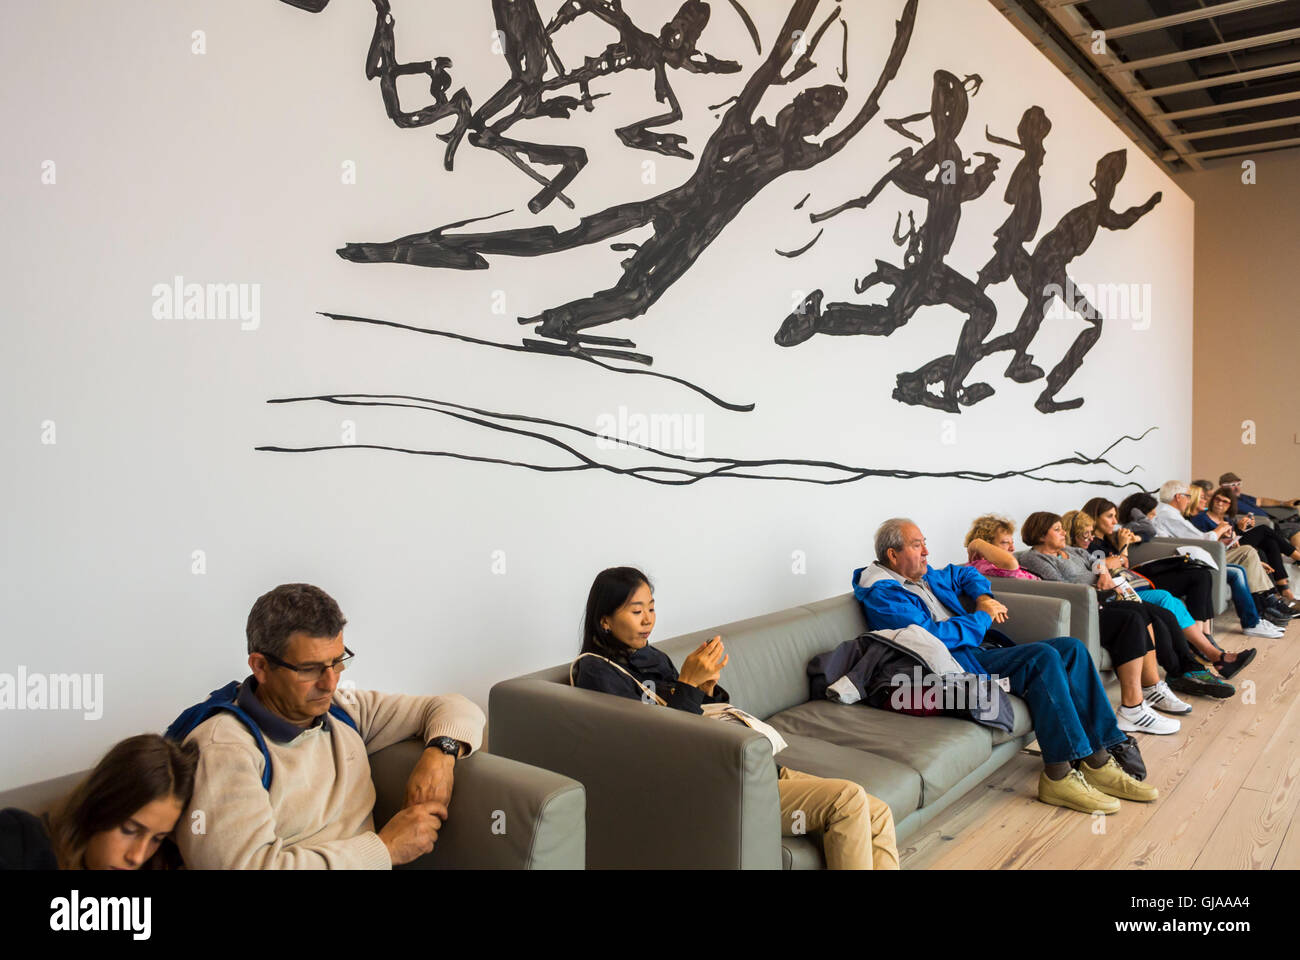 New York, NY, USA, Group of Tourists Visiting, Sitting in Lounge with Graphic Wall Mural, in Modern American Art Museum, Downtown Whitney Museum, in Meat Packing District Neighborhood Stock Photo